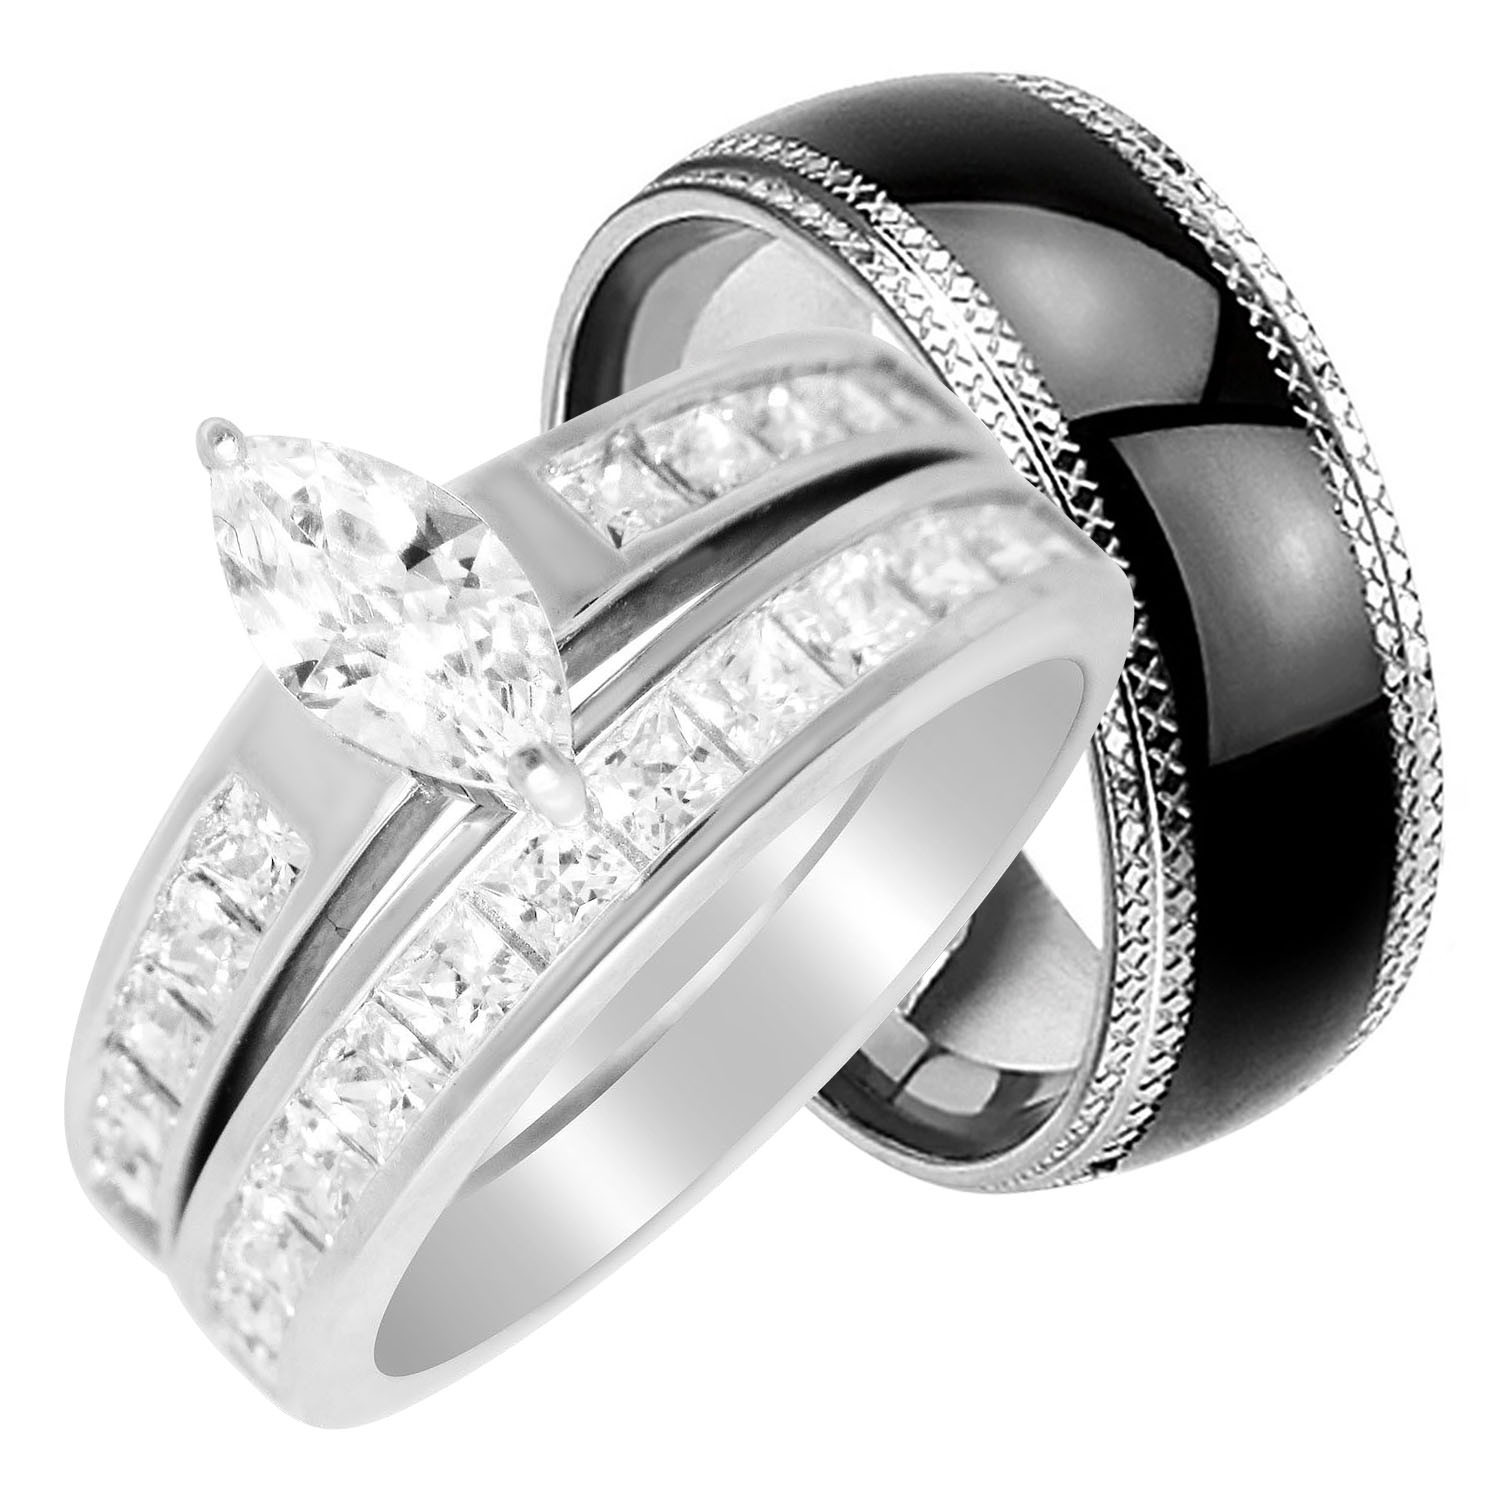 Cheap Wedding Ring Sets His And Hers
 LaRaso & Co His Hers Wedding Rings Set Cheap Matching